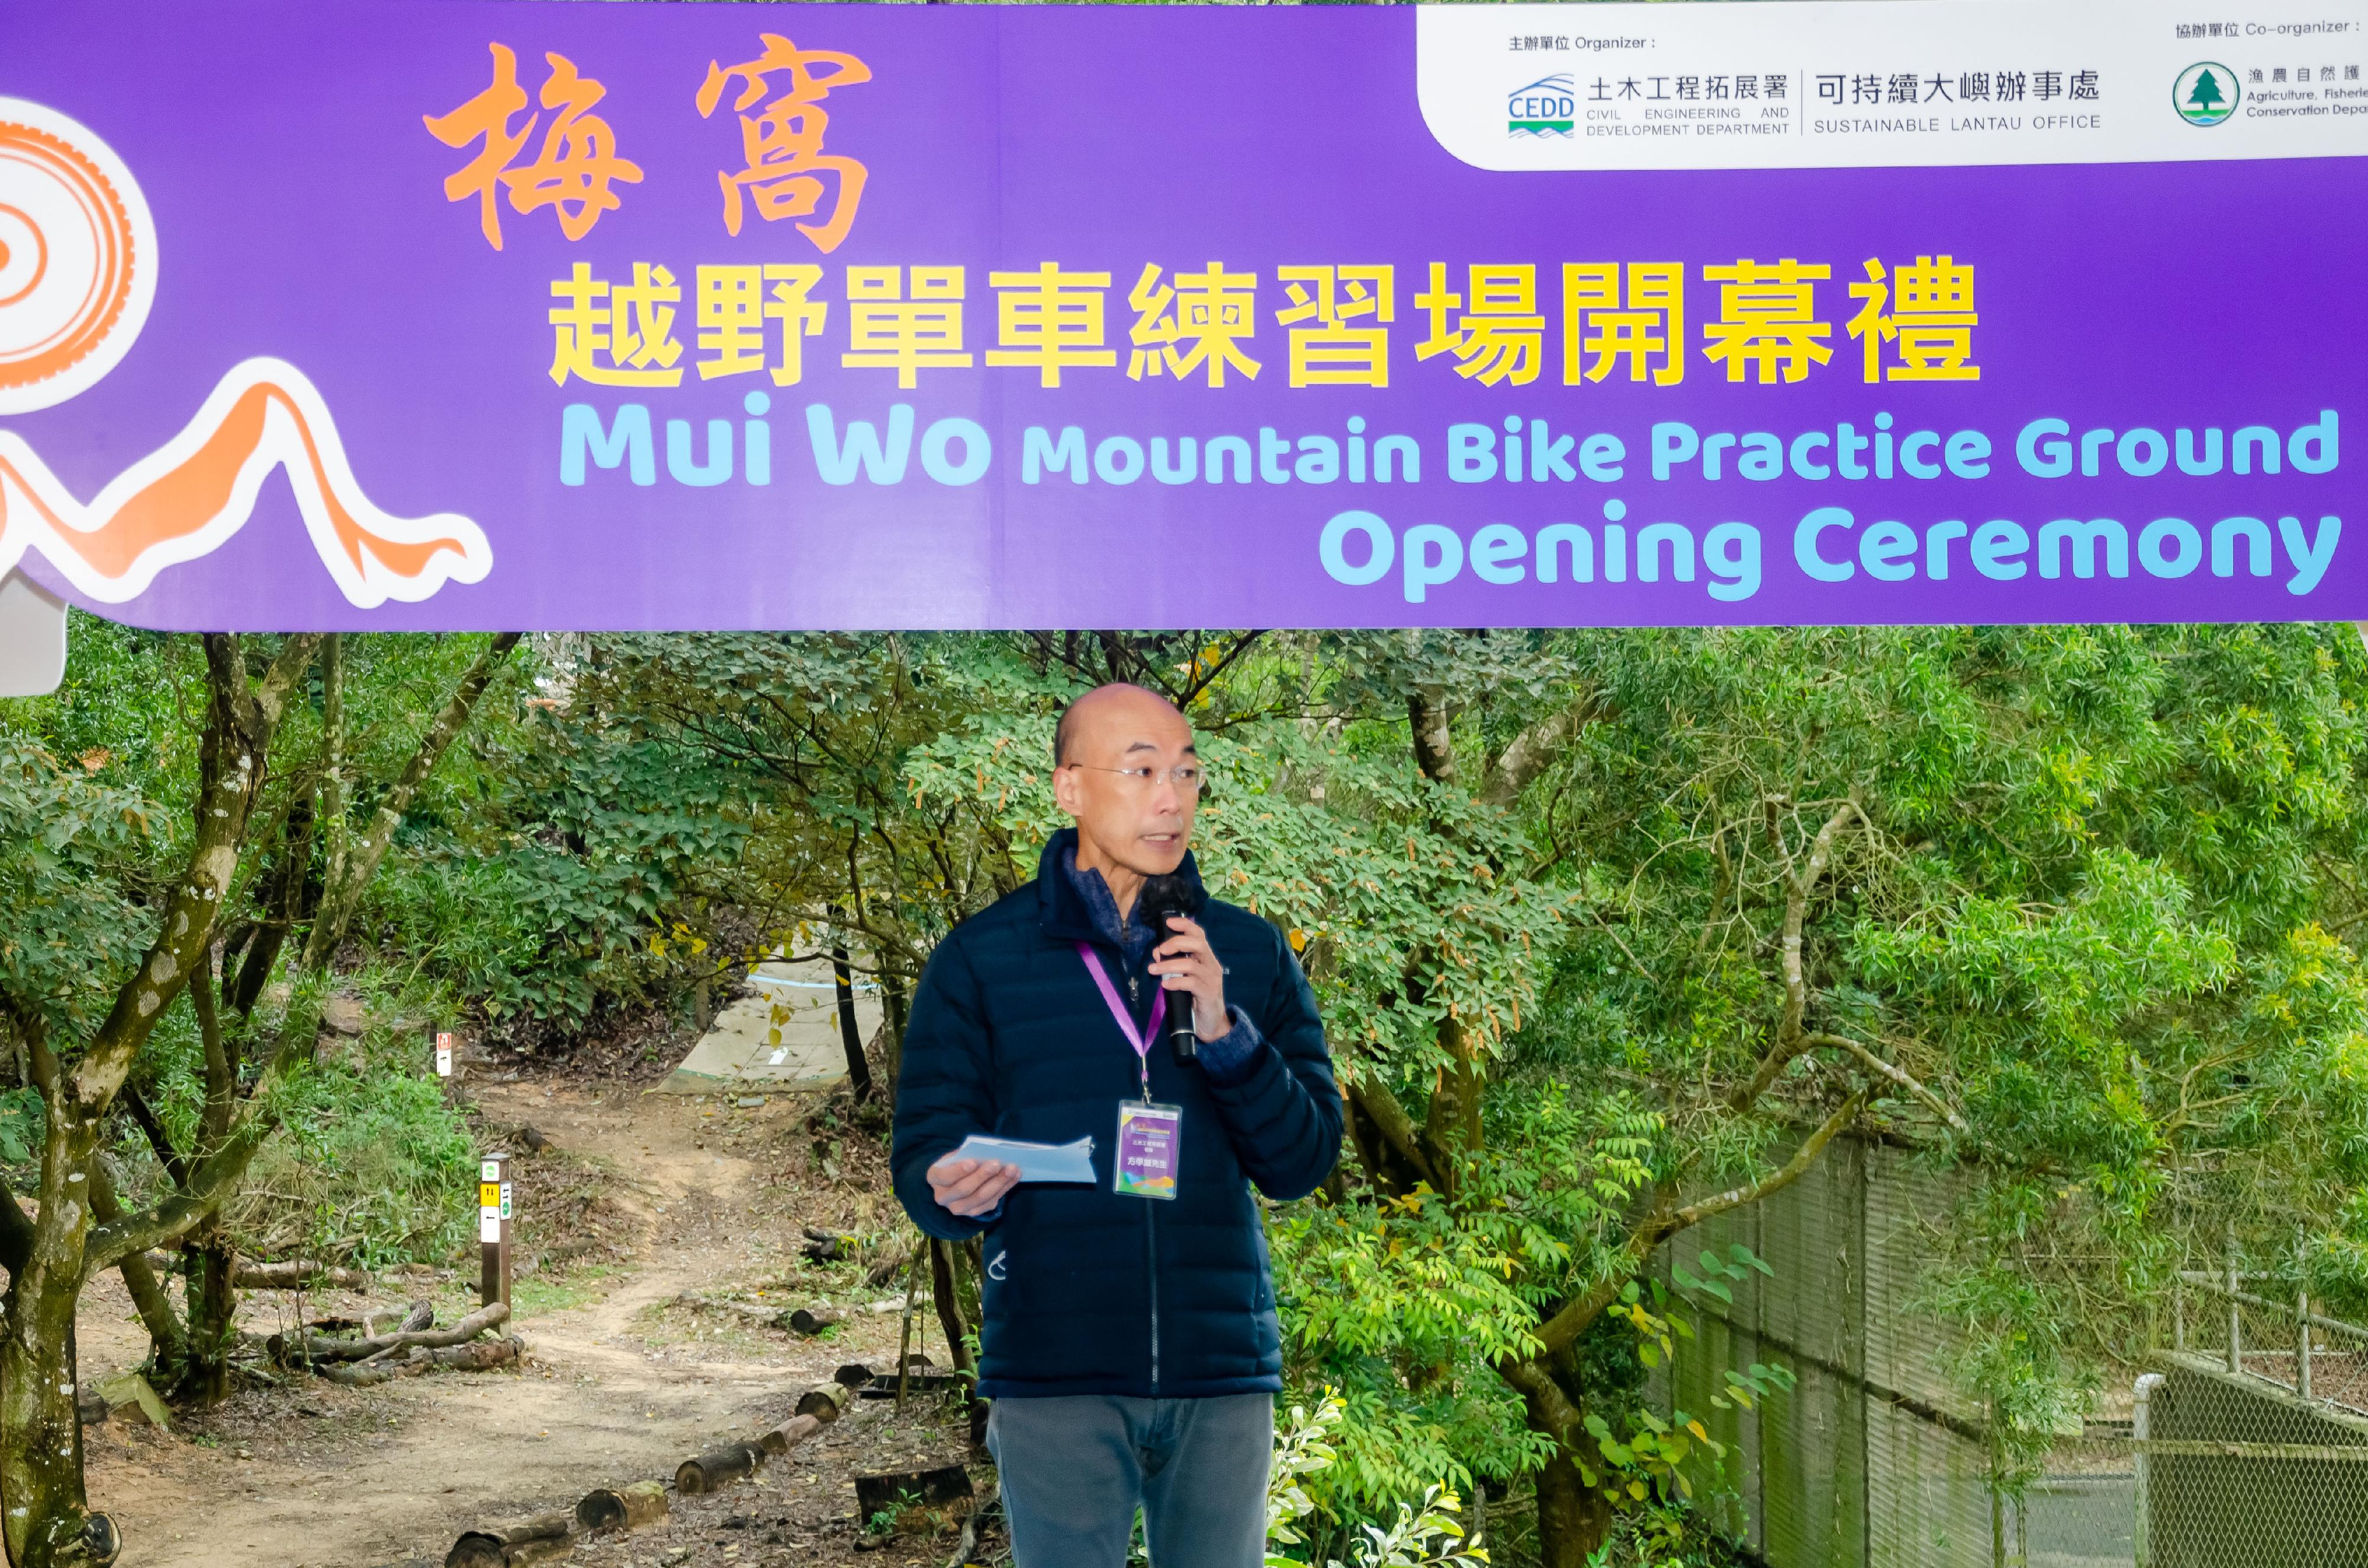 The Civil Engineering and Development Department and the Agriculture, Fisheries and Conservation Department held the Mui Wo Mountain Bike Practice Ground Opening Ceremony today (December 17). Photo shows the Director of Civil Engineering and Development, Mr Michael Fong, speaking at the ceremony.